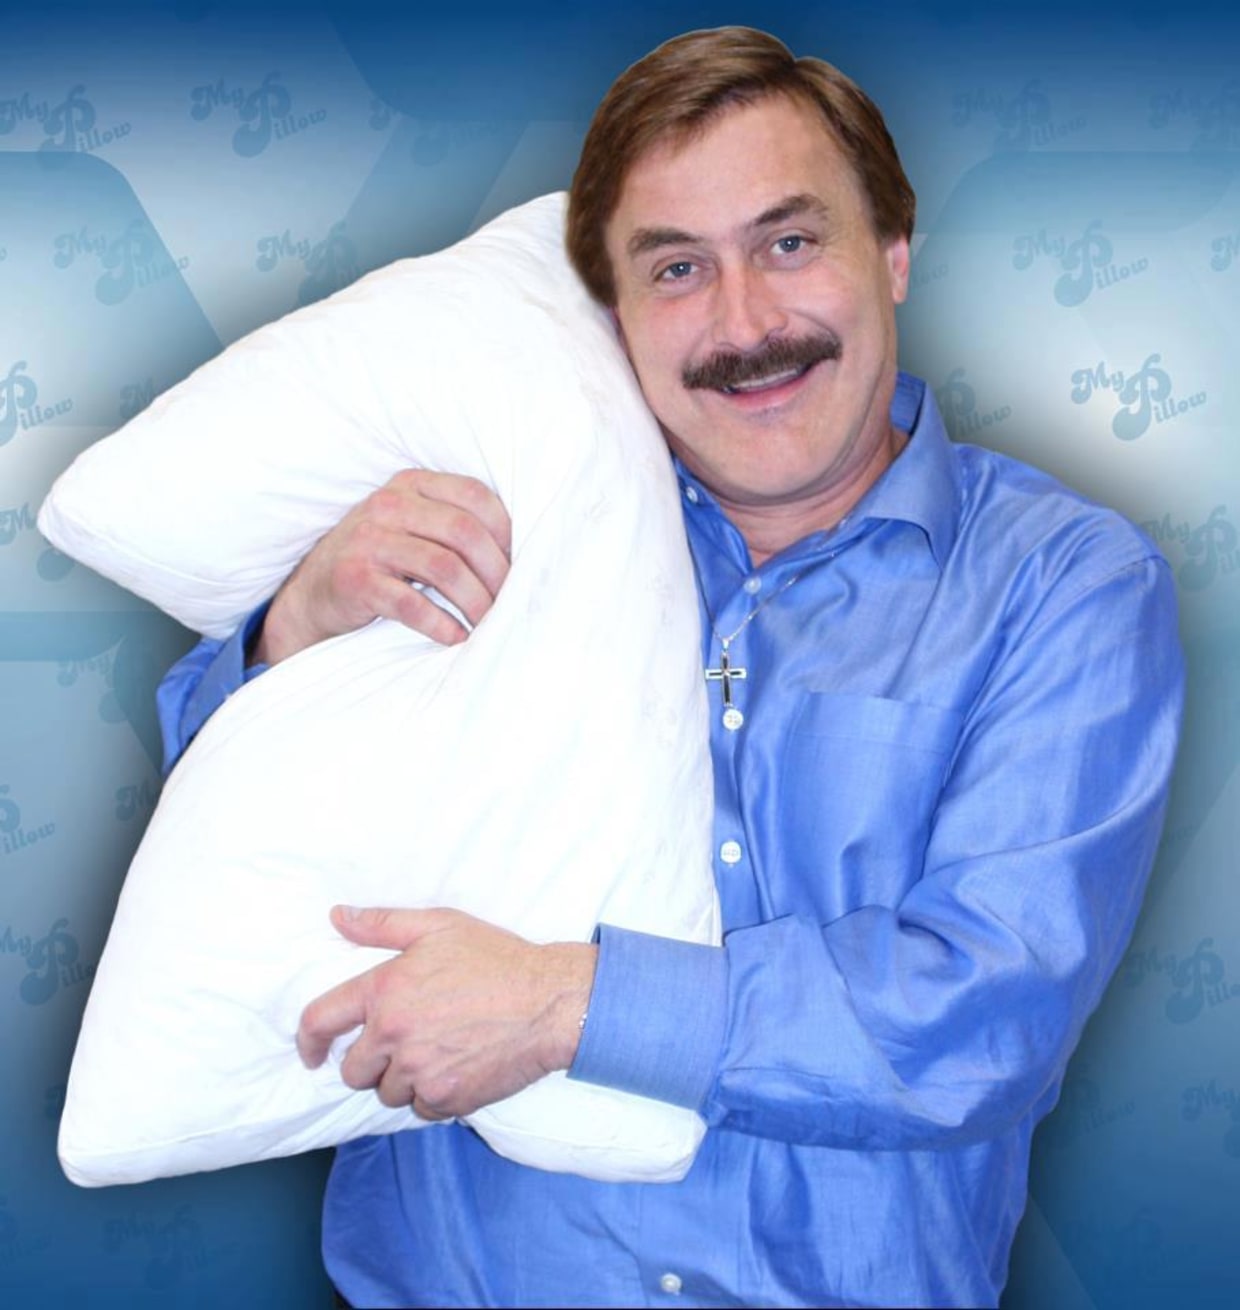 mike lindell my pillow